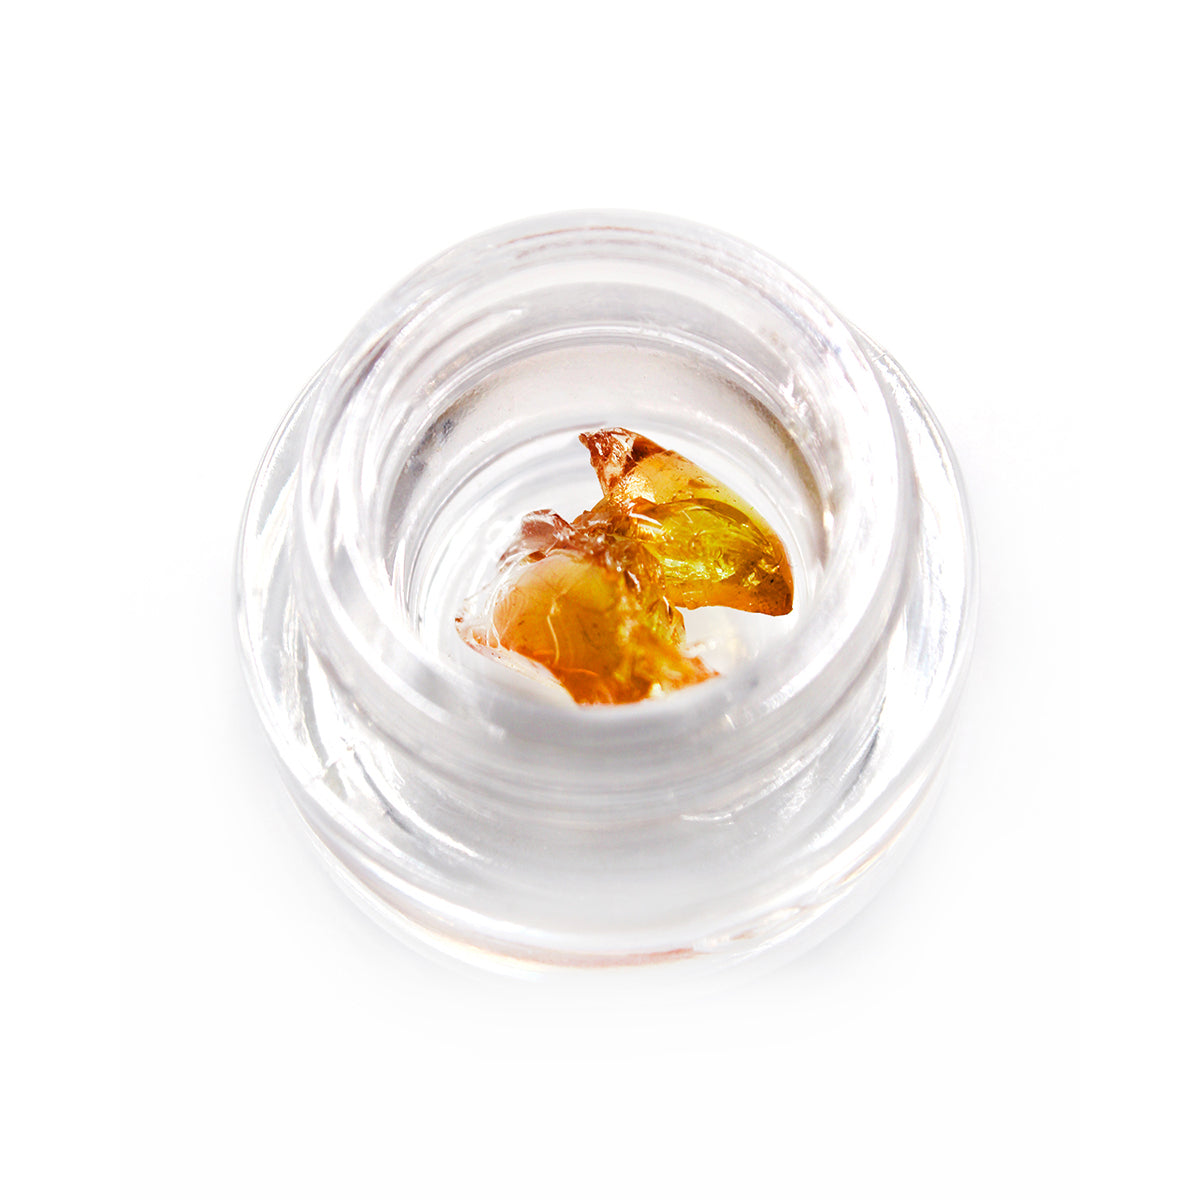 Delta-8 THC Shatter Concentrate